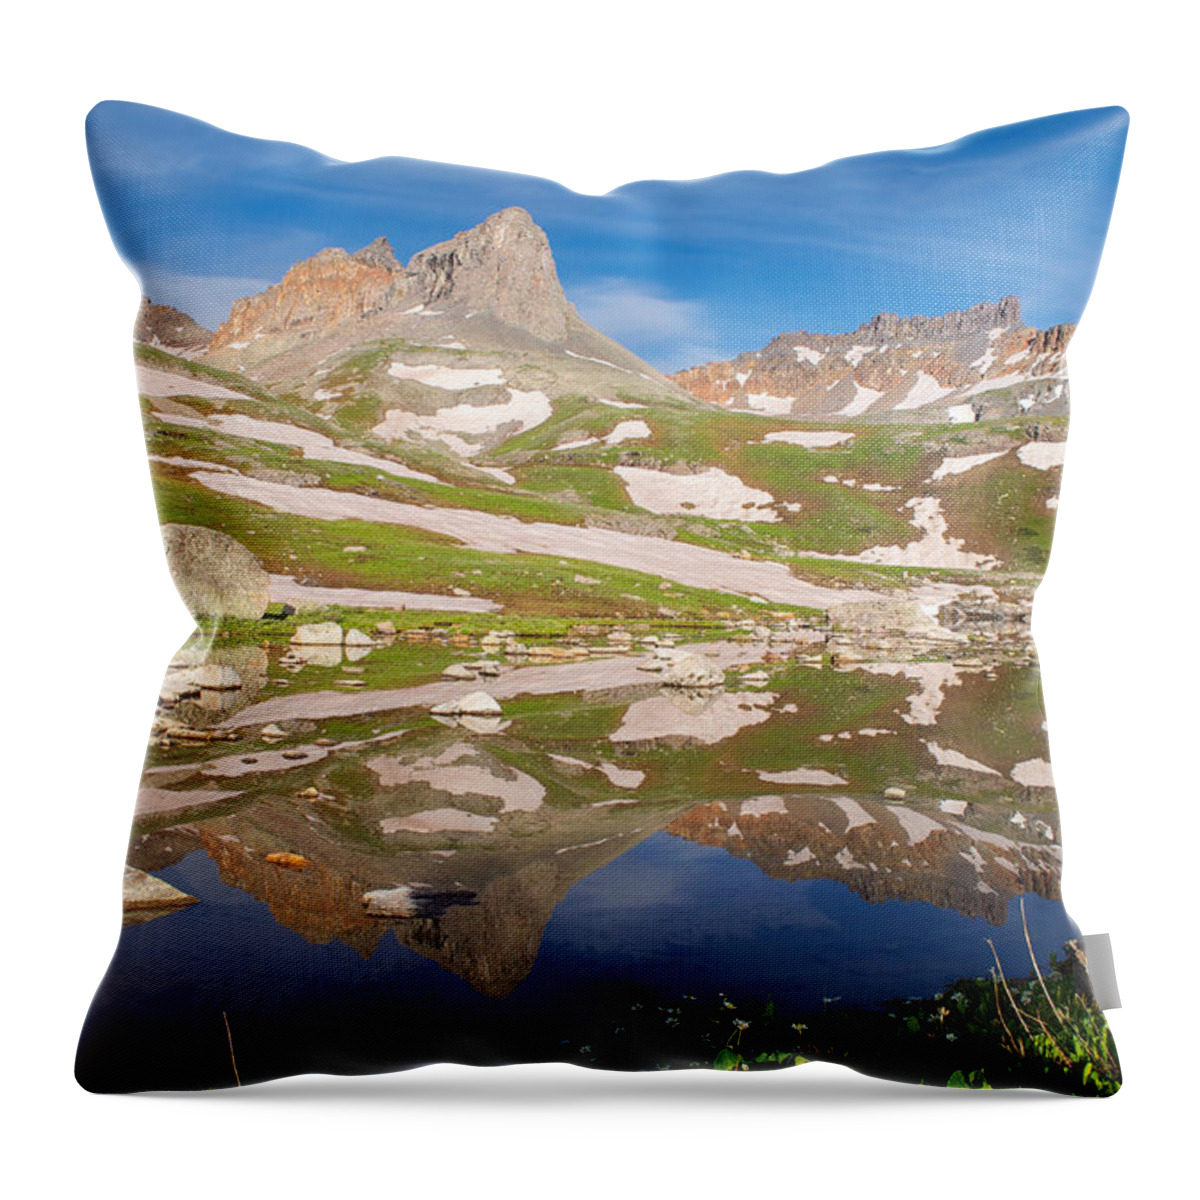 Landscape Throw Pillow featuring the photograph Ice Lakes Reflection by Aaron Spong